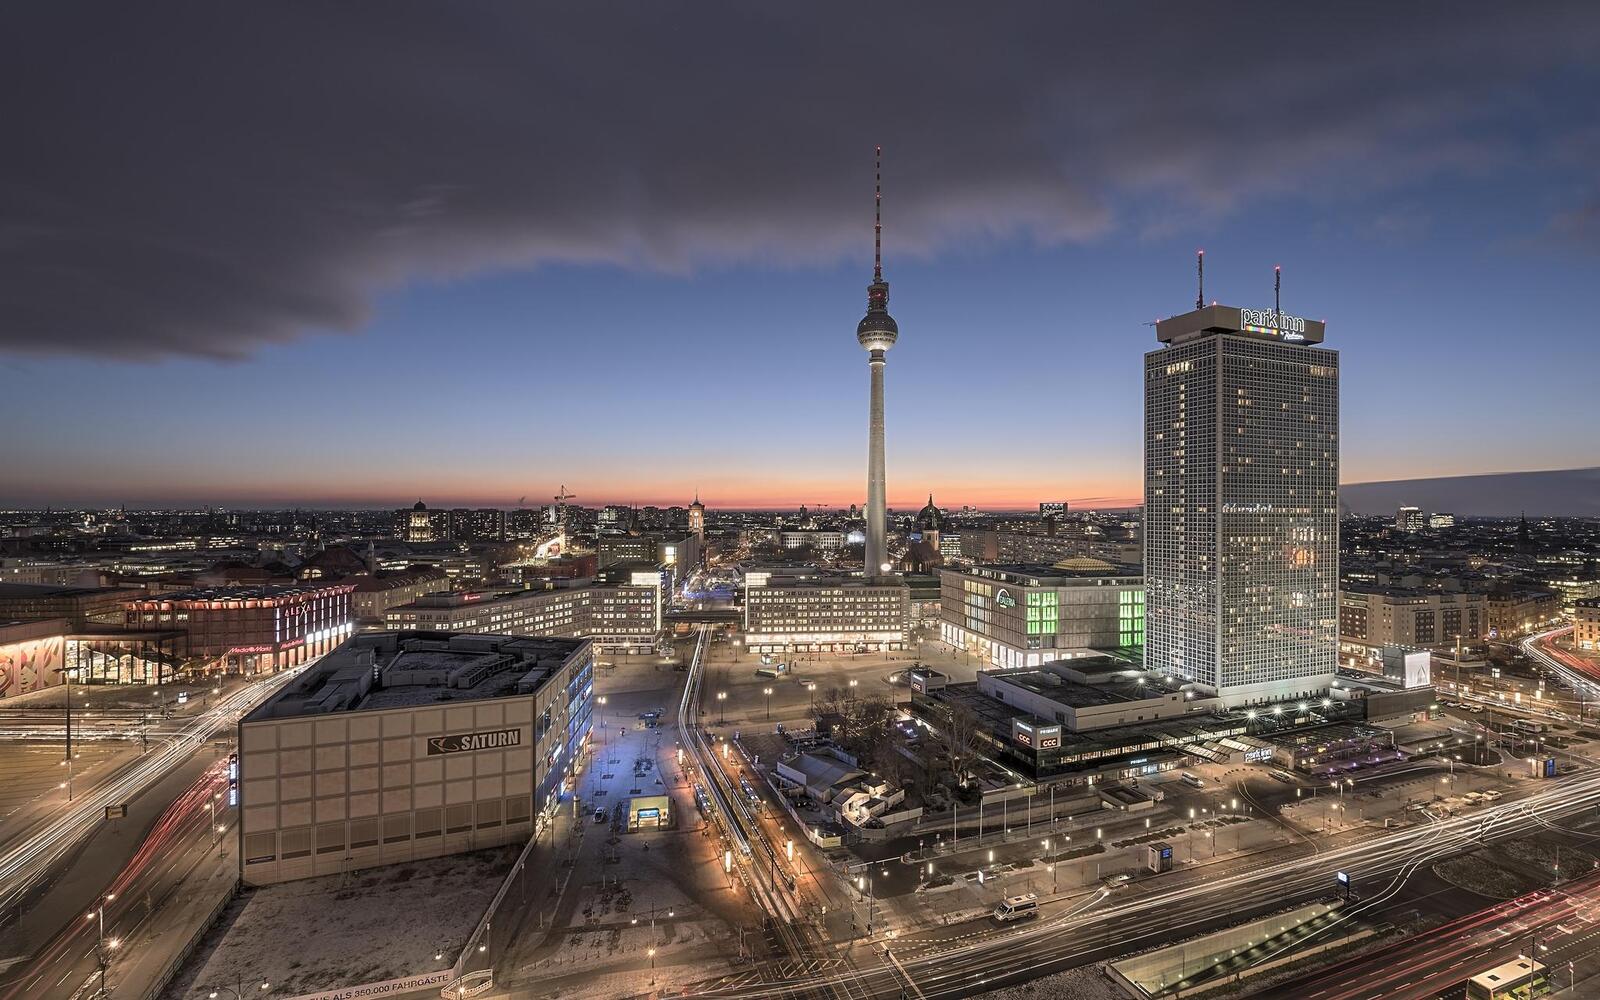 Wallpapers darkens Germany architecture on the desktop